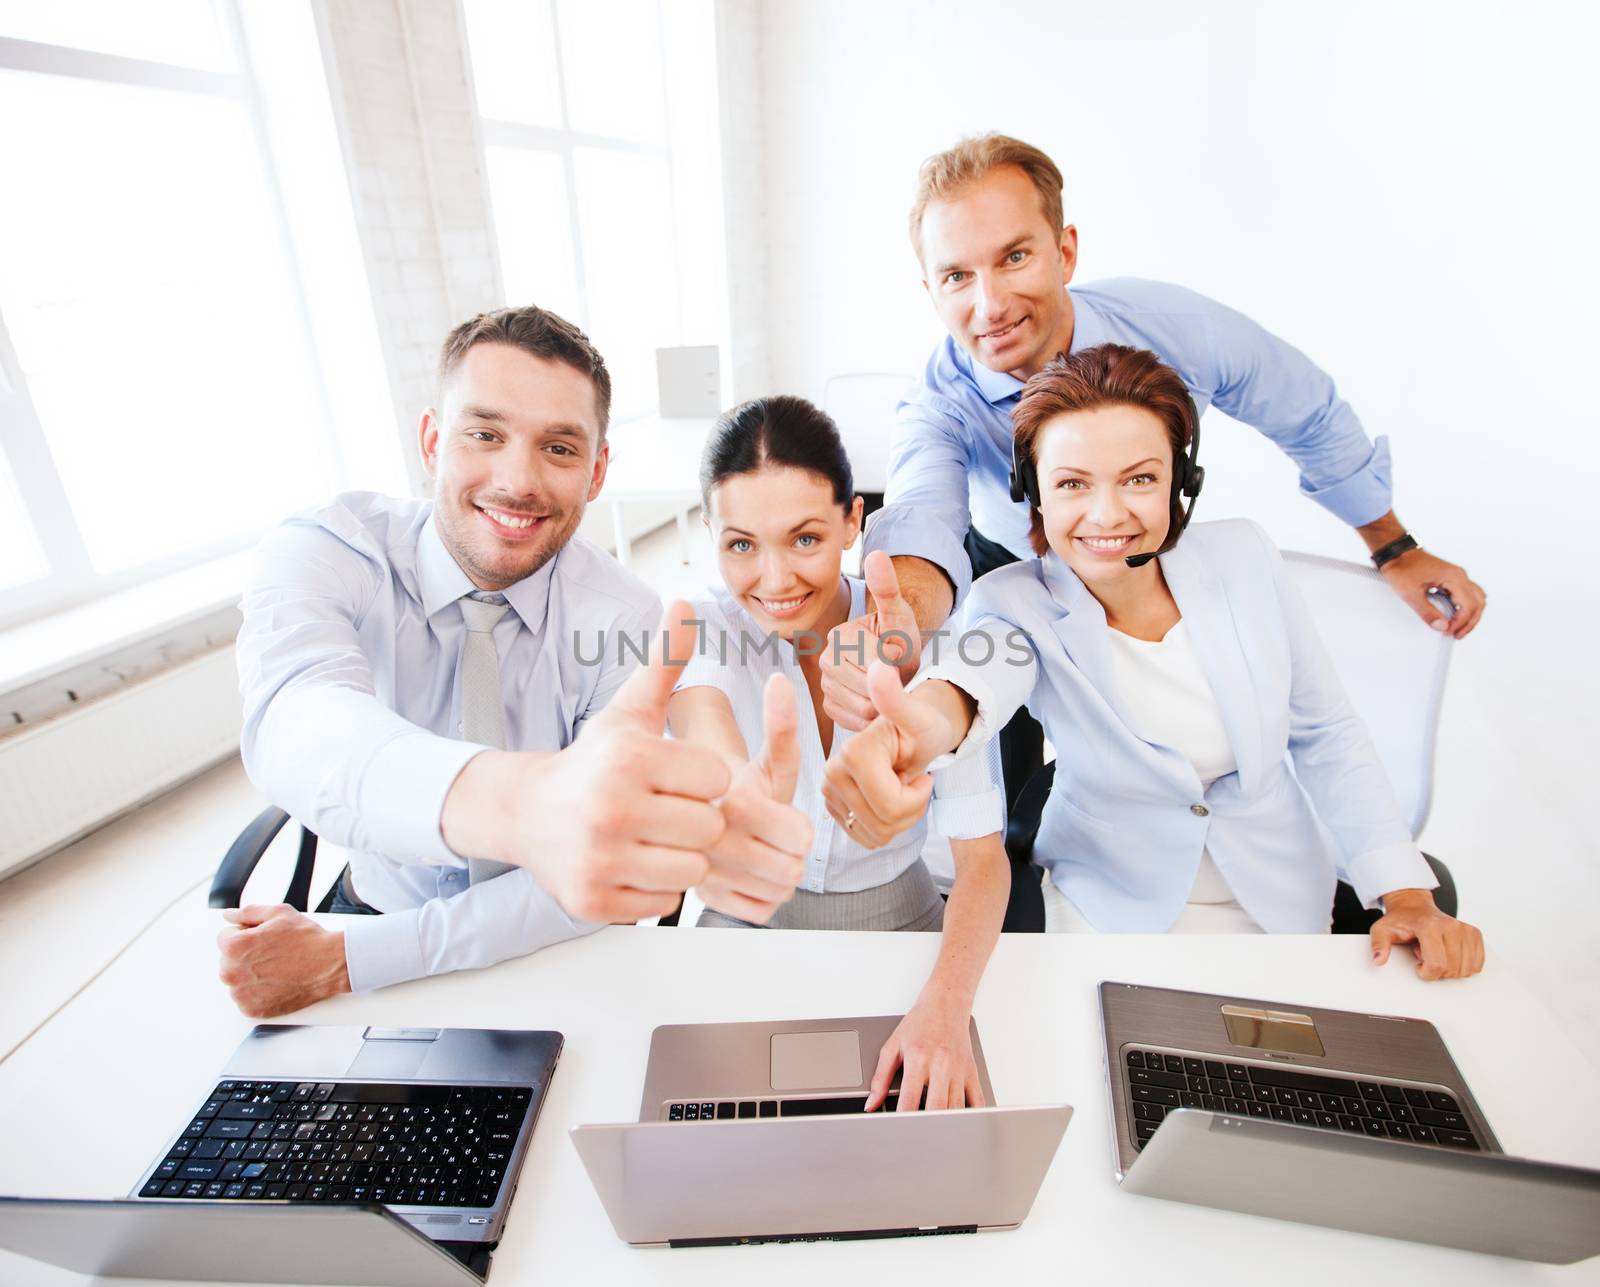 group of office workers showing thumbs up by dolgachov